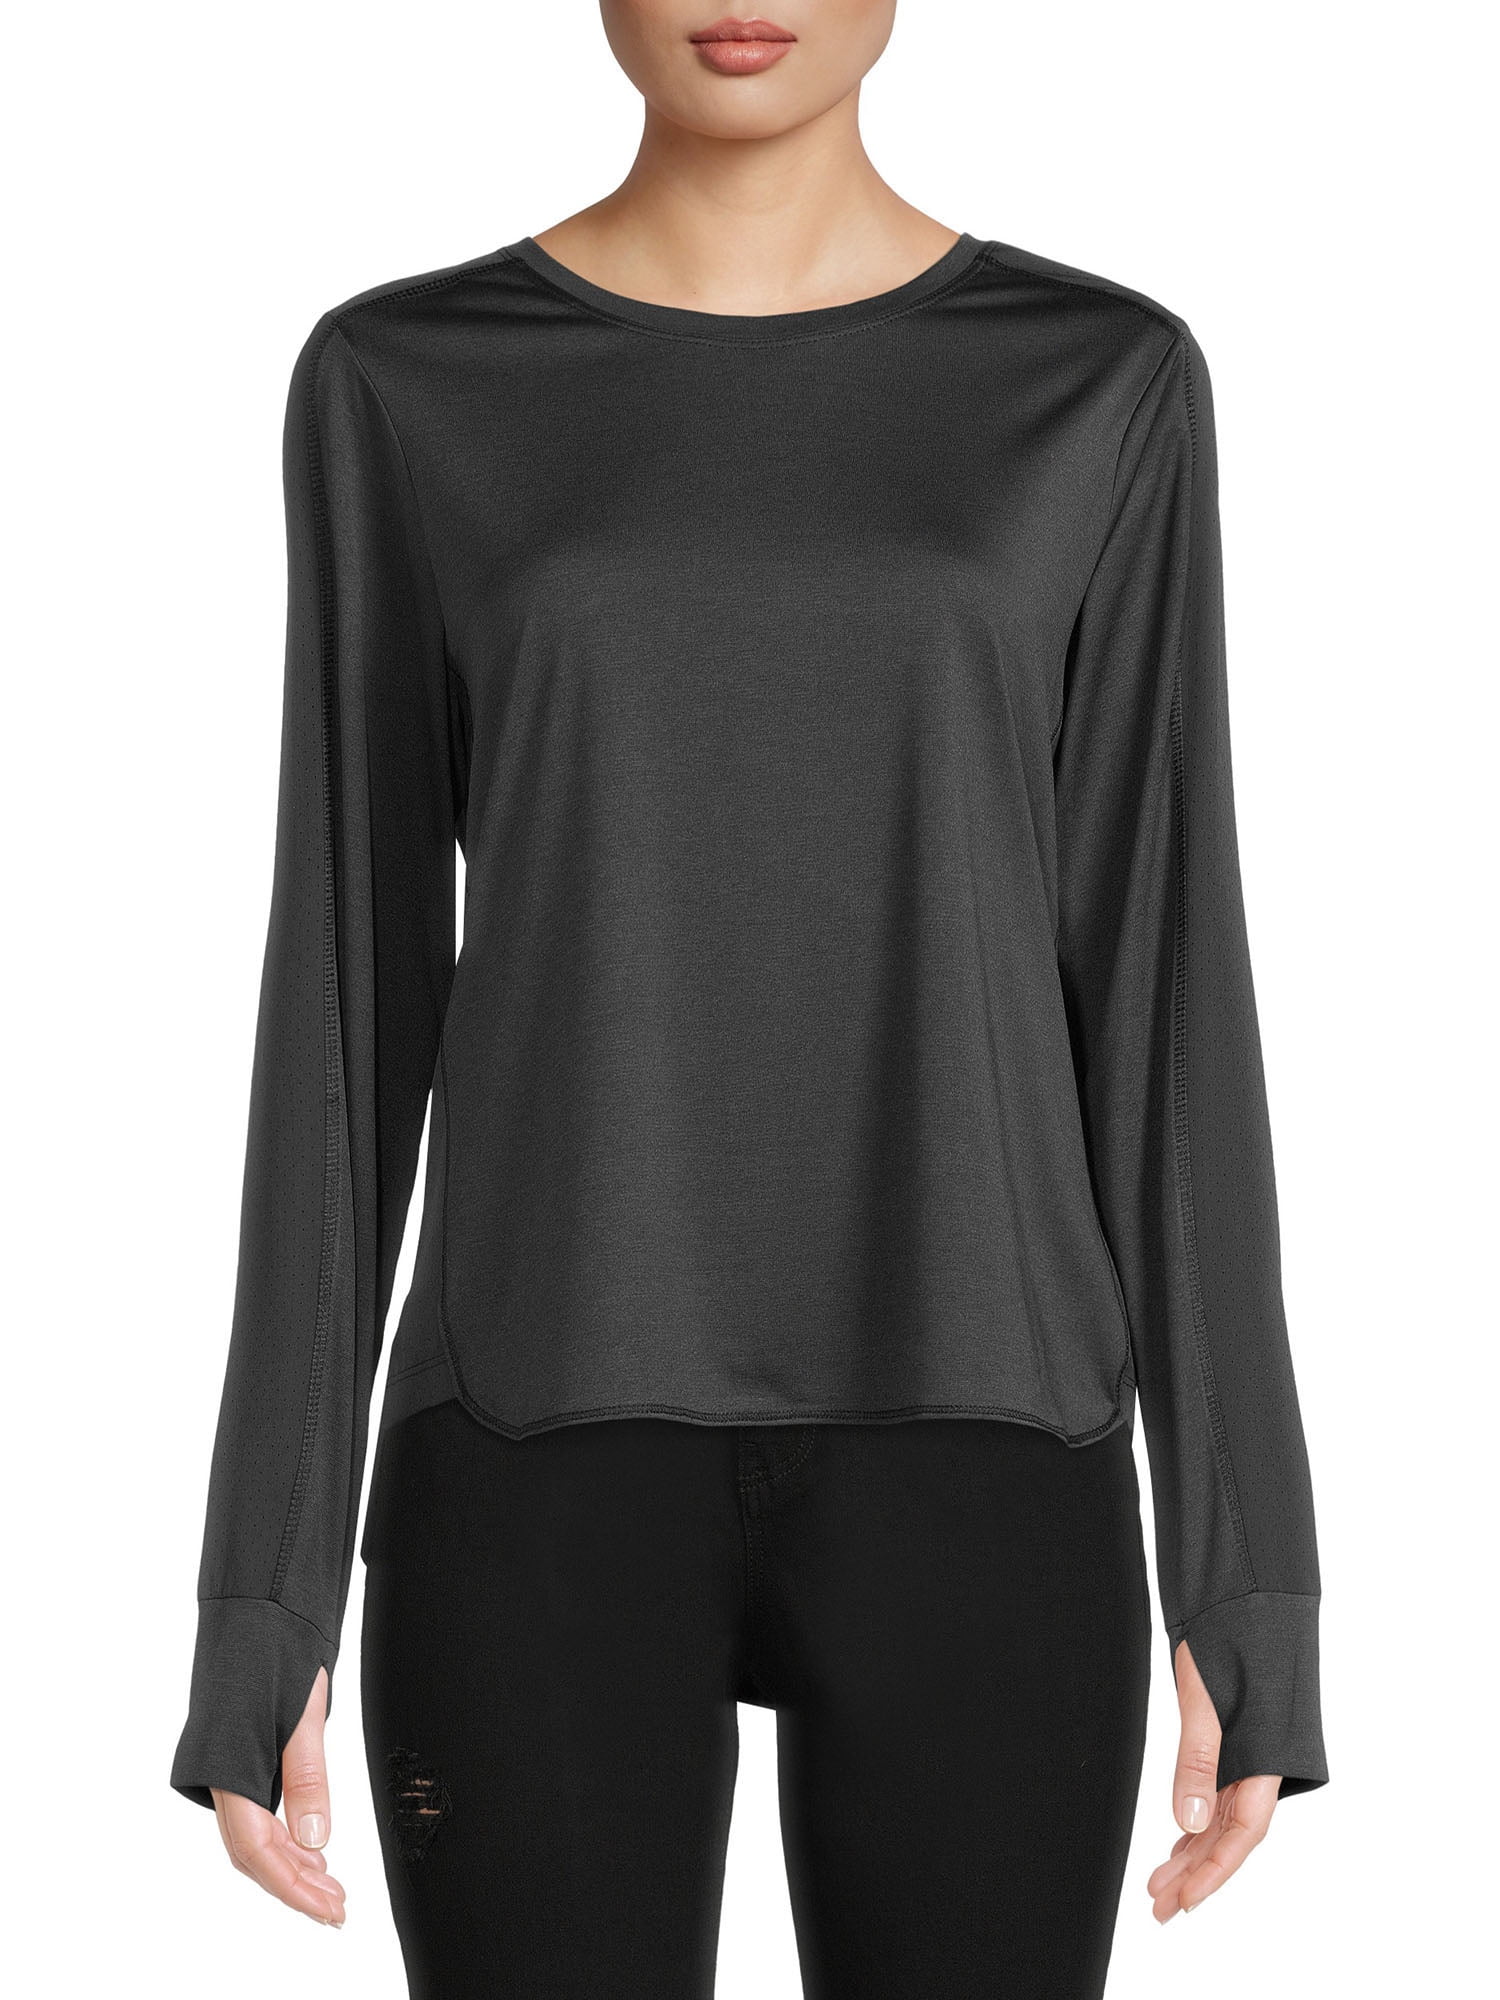 Avia Women's Performance Long Sleeves T-Shirt with Thumb-Hole Cuffs ...